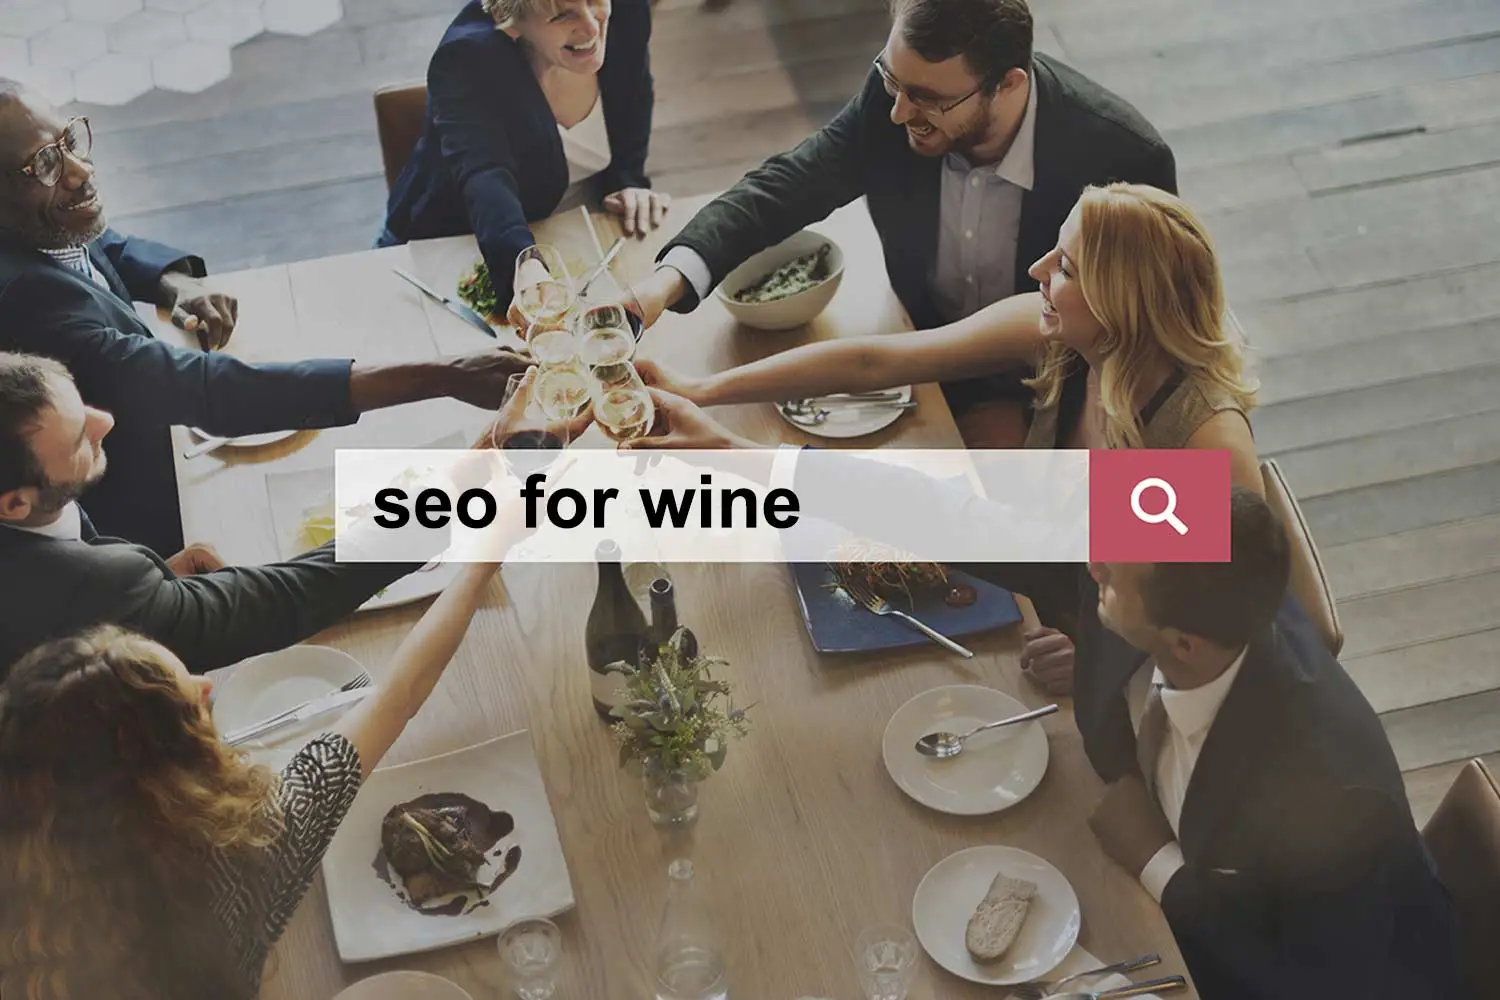 people at table toasting with wine; search field overlay includes the text "SEO for wine"